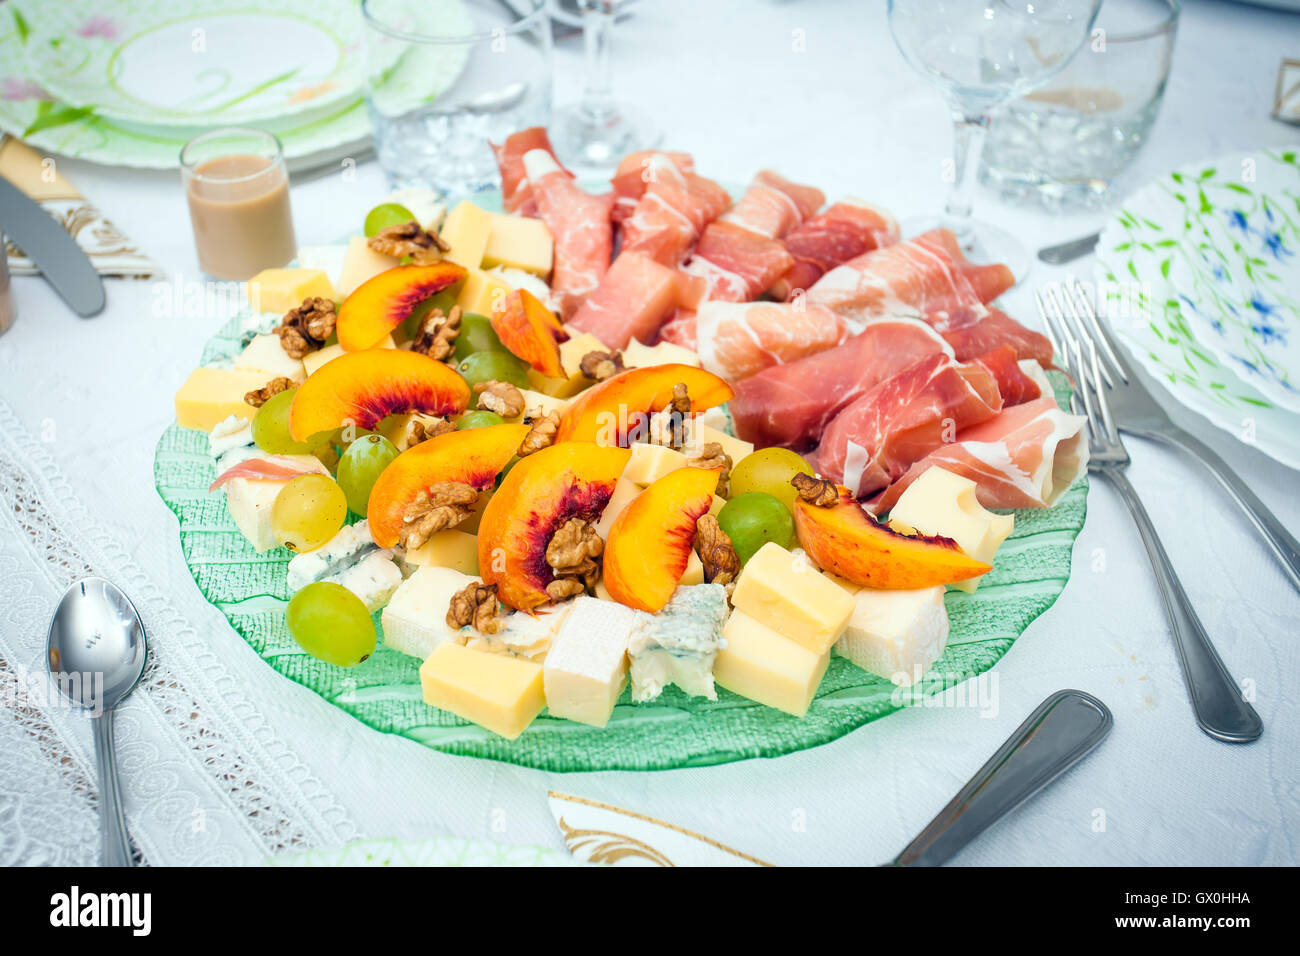 Cocktail food appetizer with ham rolls, peaches, grapes, wallnuts and a variety of cheeses Stock Photo